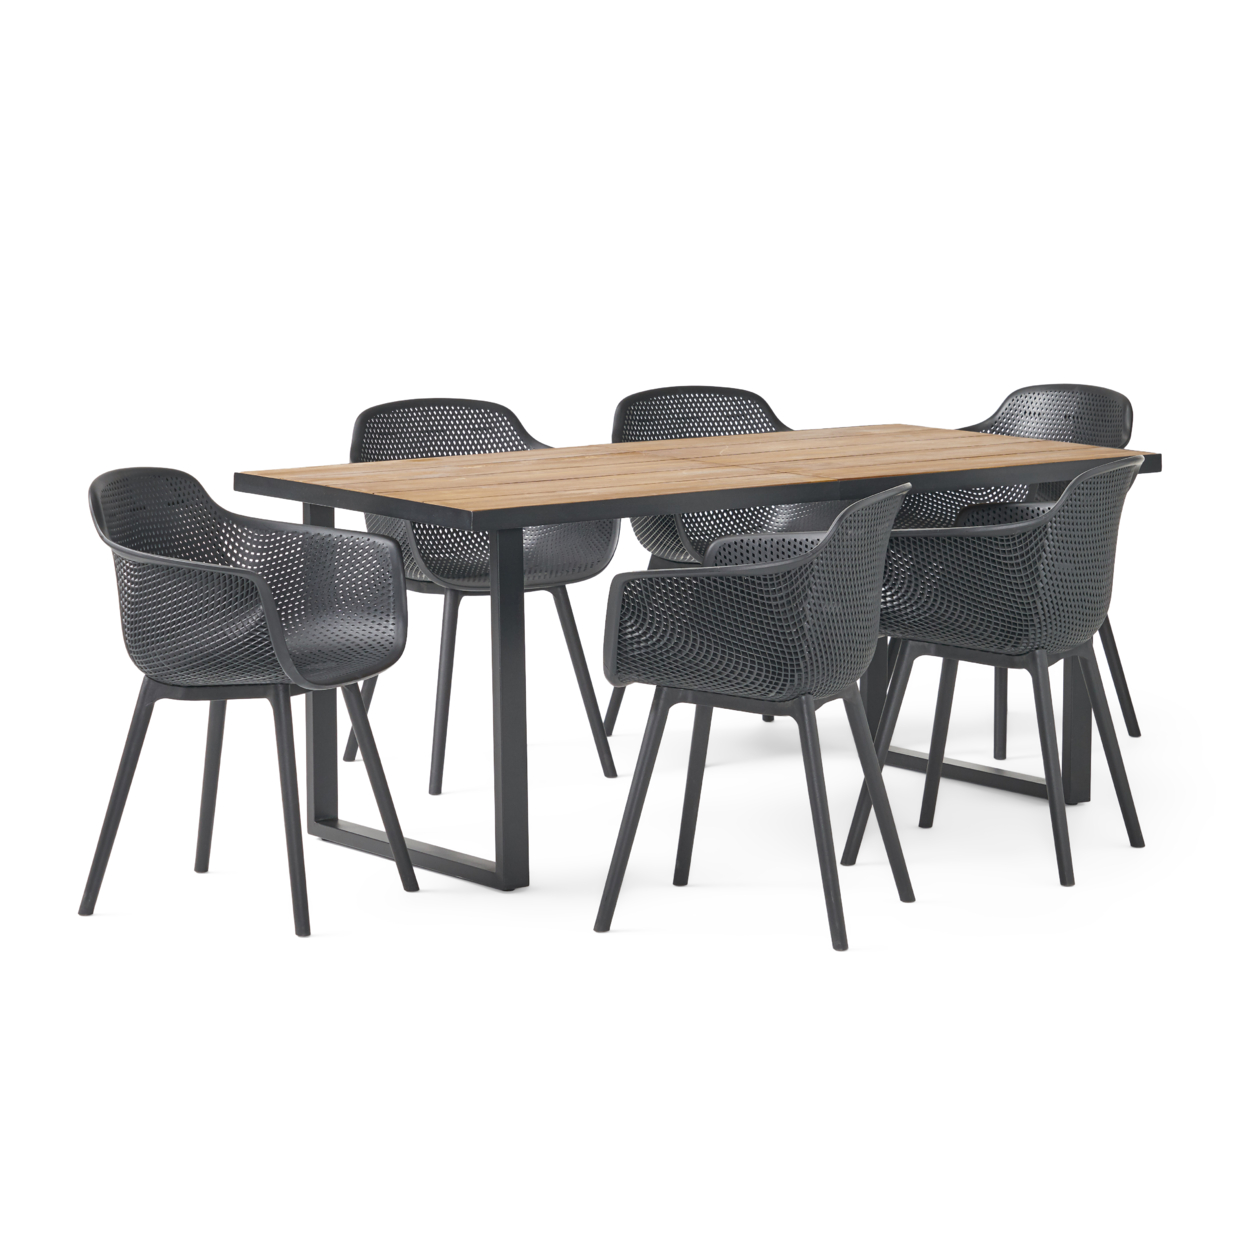 Lotus Outdoor Wood And Resin 7 Piece Dining Set, Black And Teak